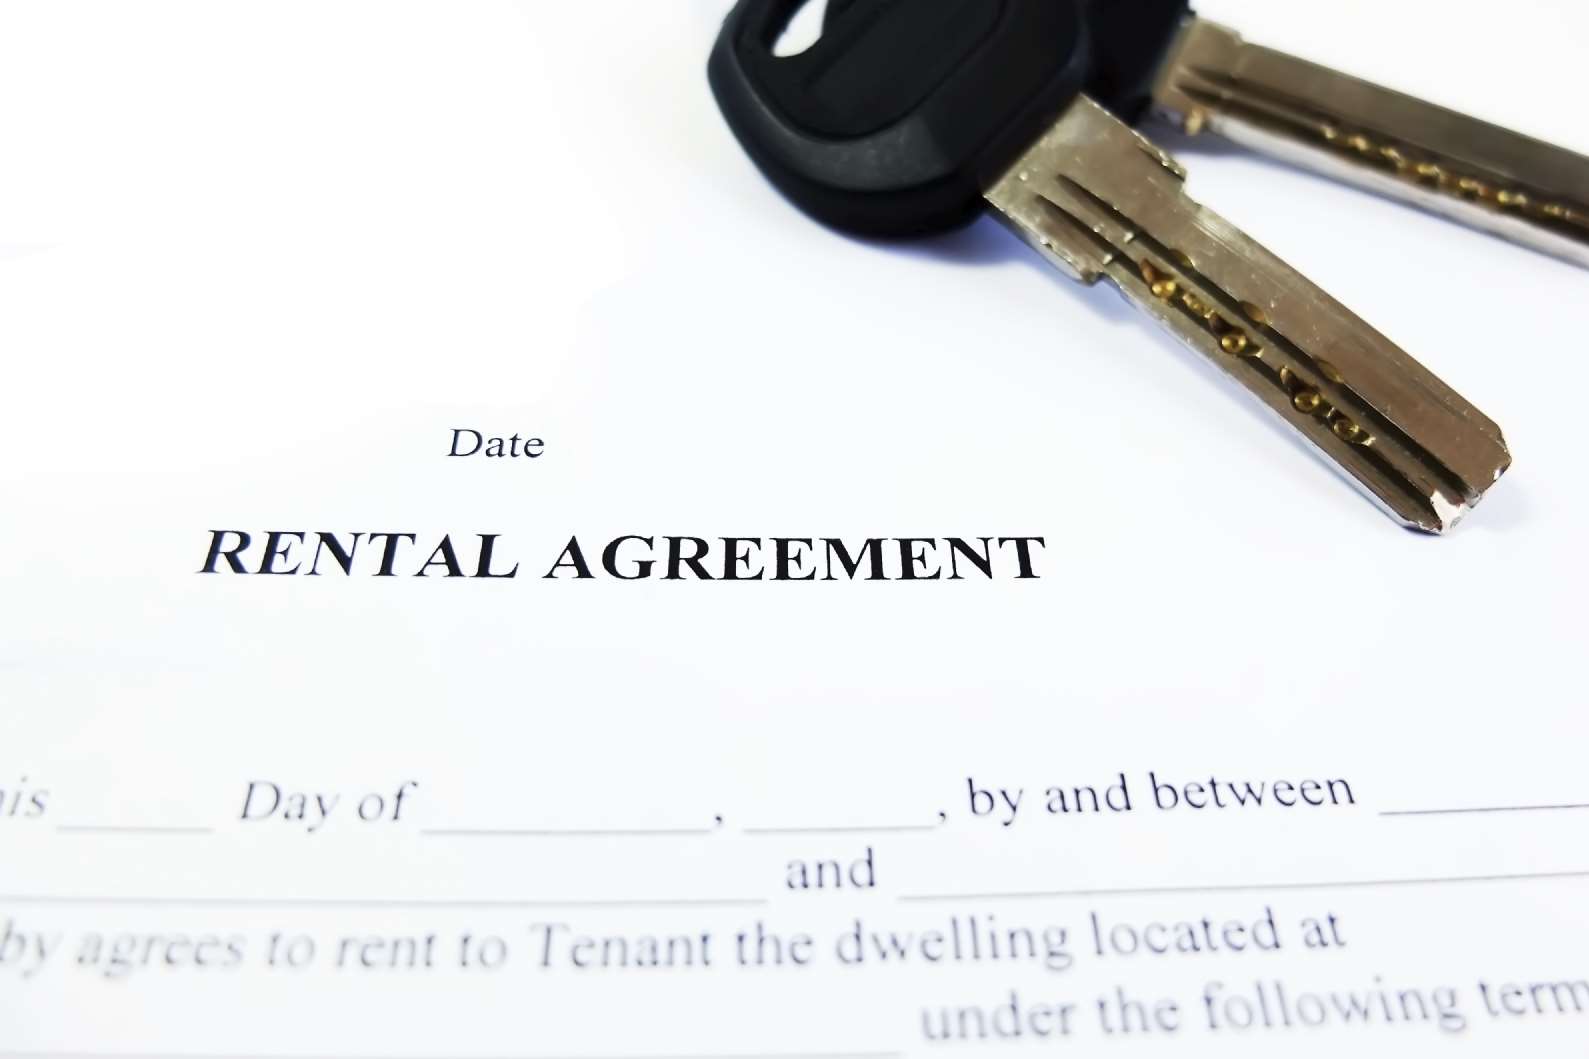 Leasing or selling a commercial property should be undertaken by a trained commercial agent